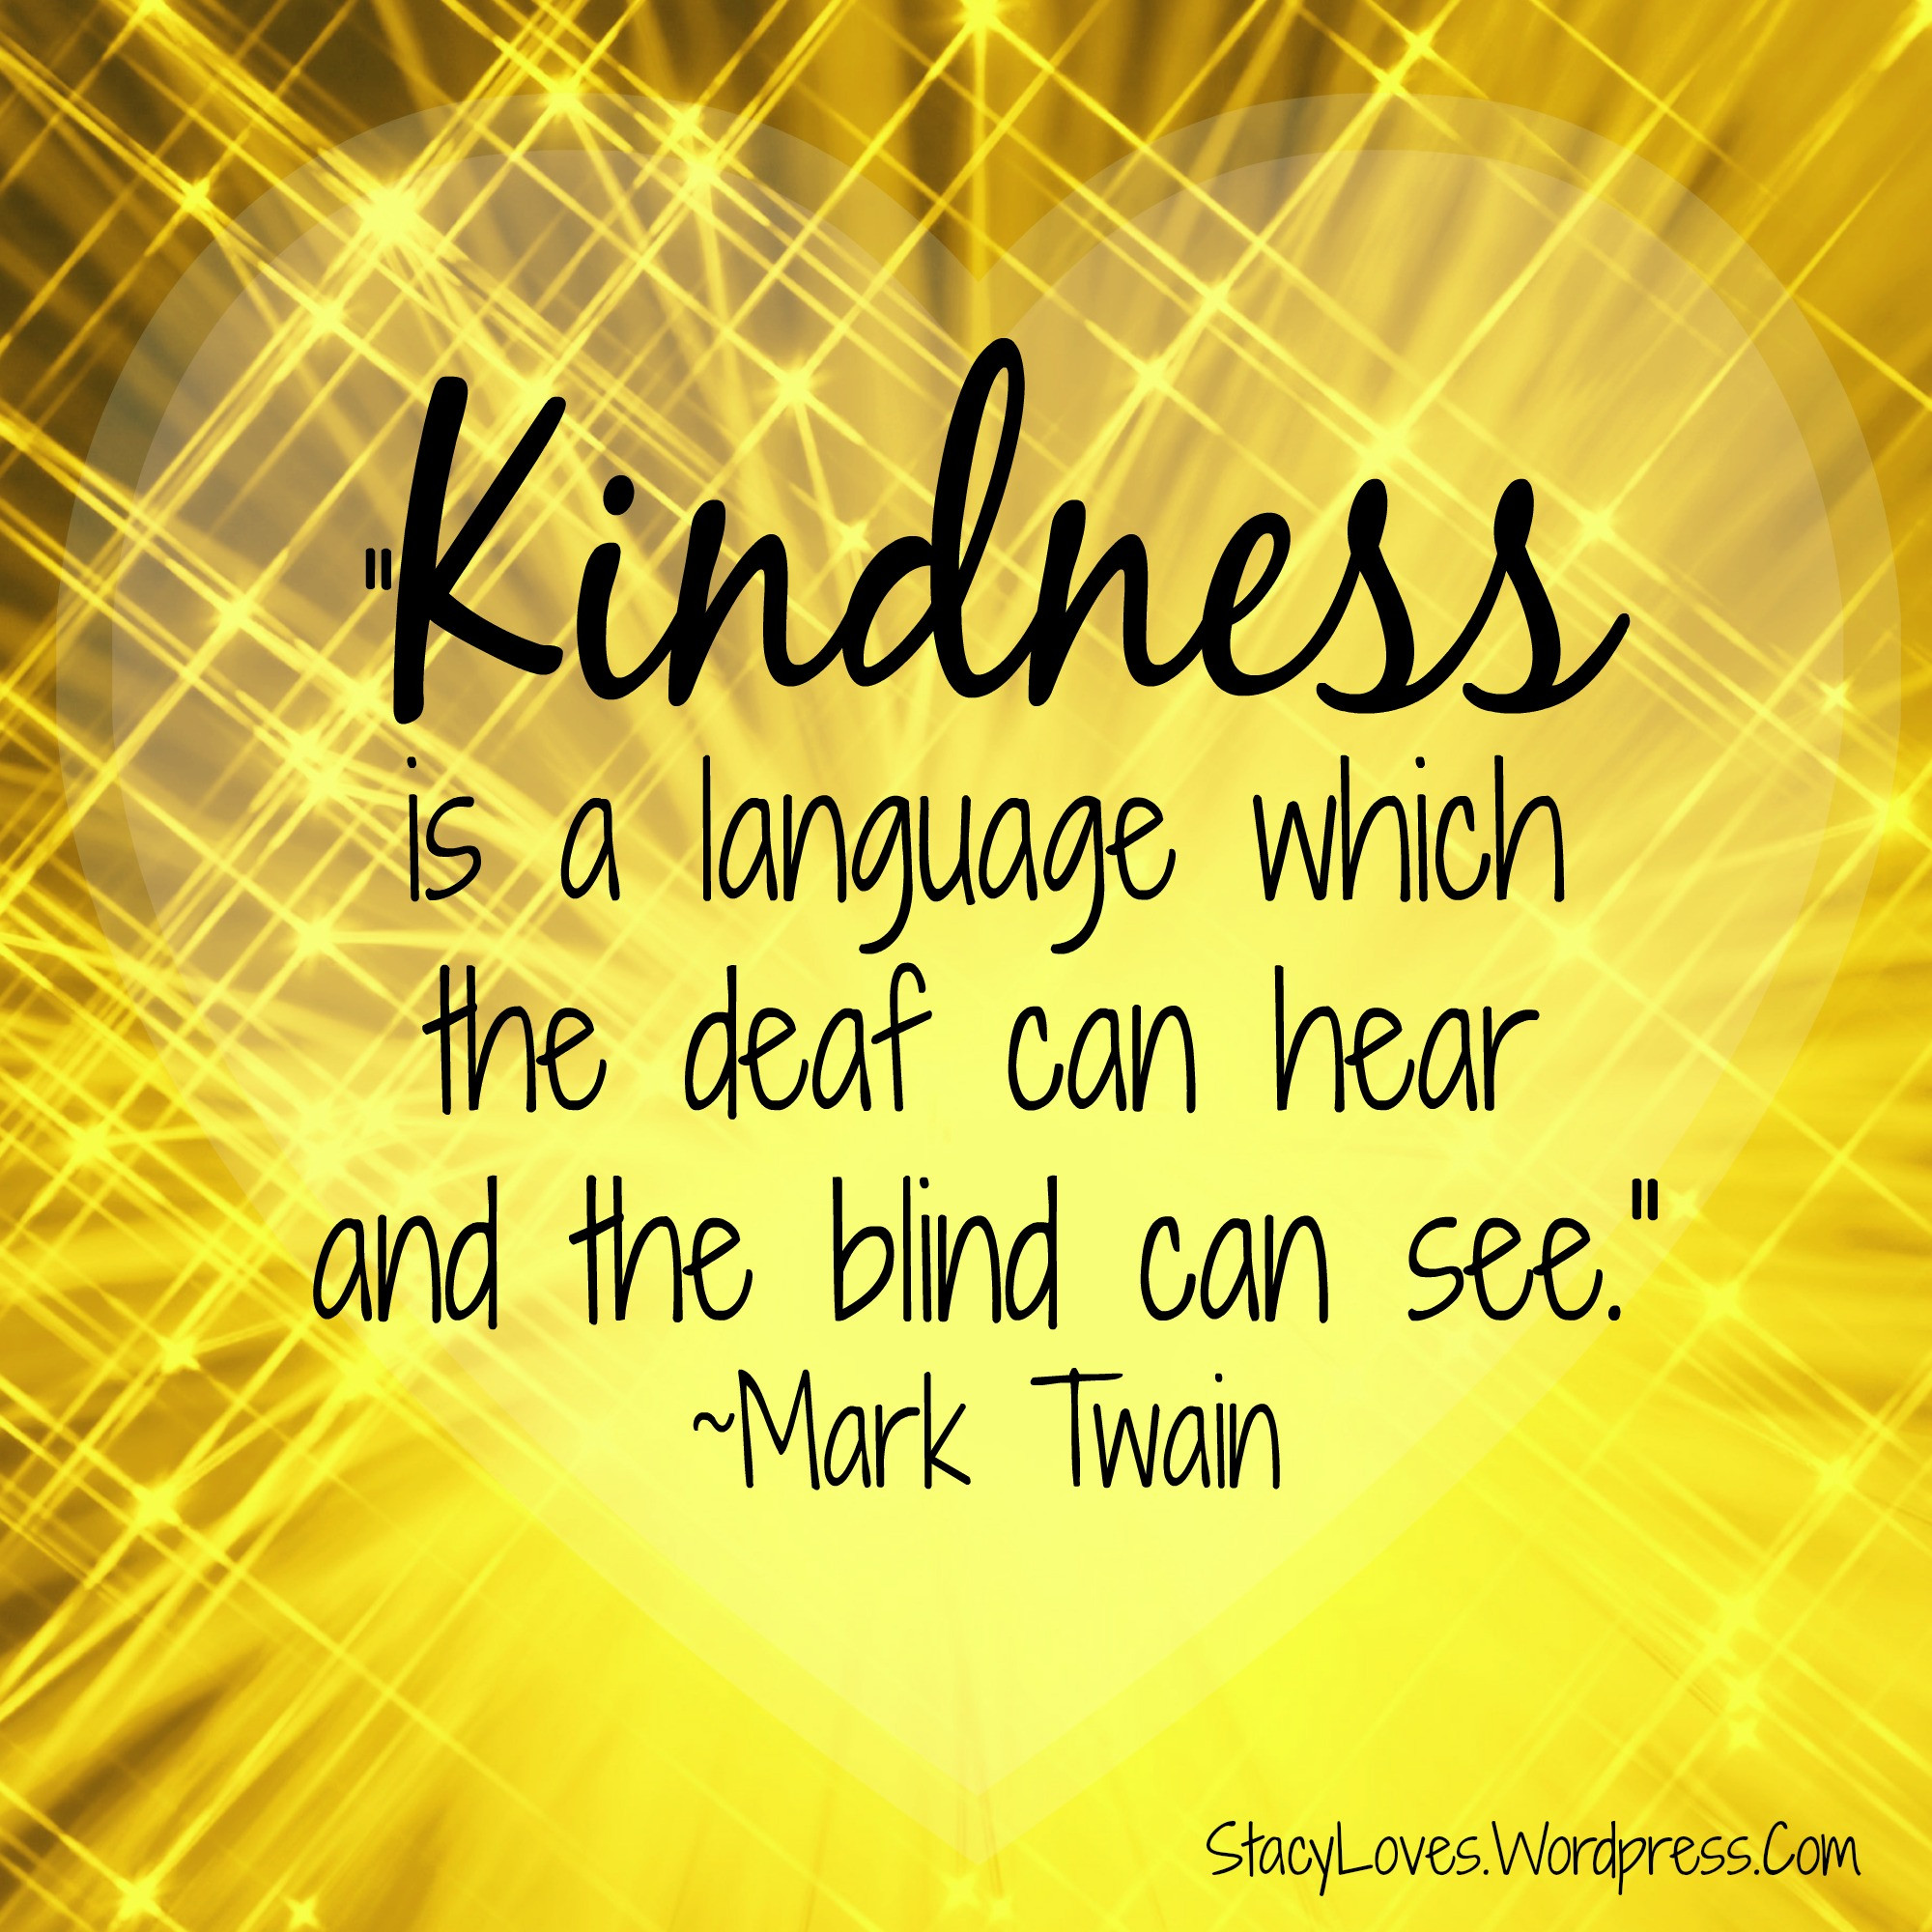 Mark Twain Kindness Quote
 inspirational quotes Stacy Loves